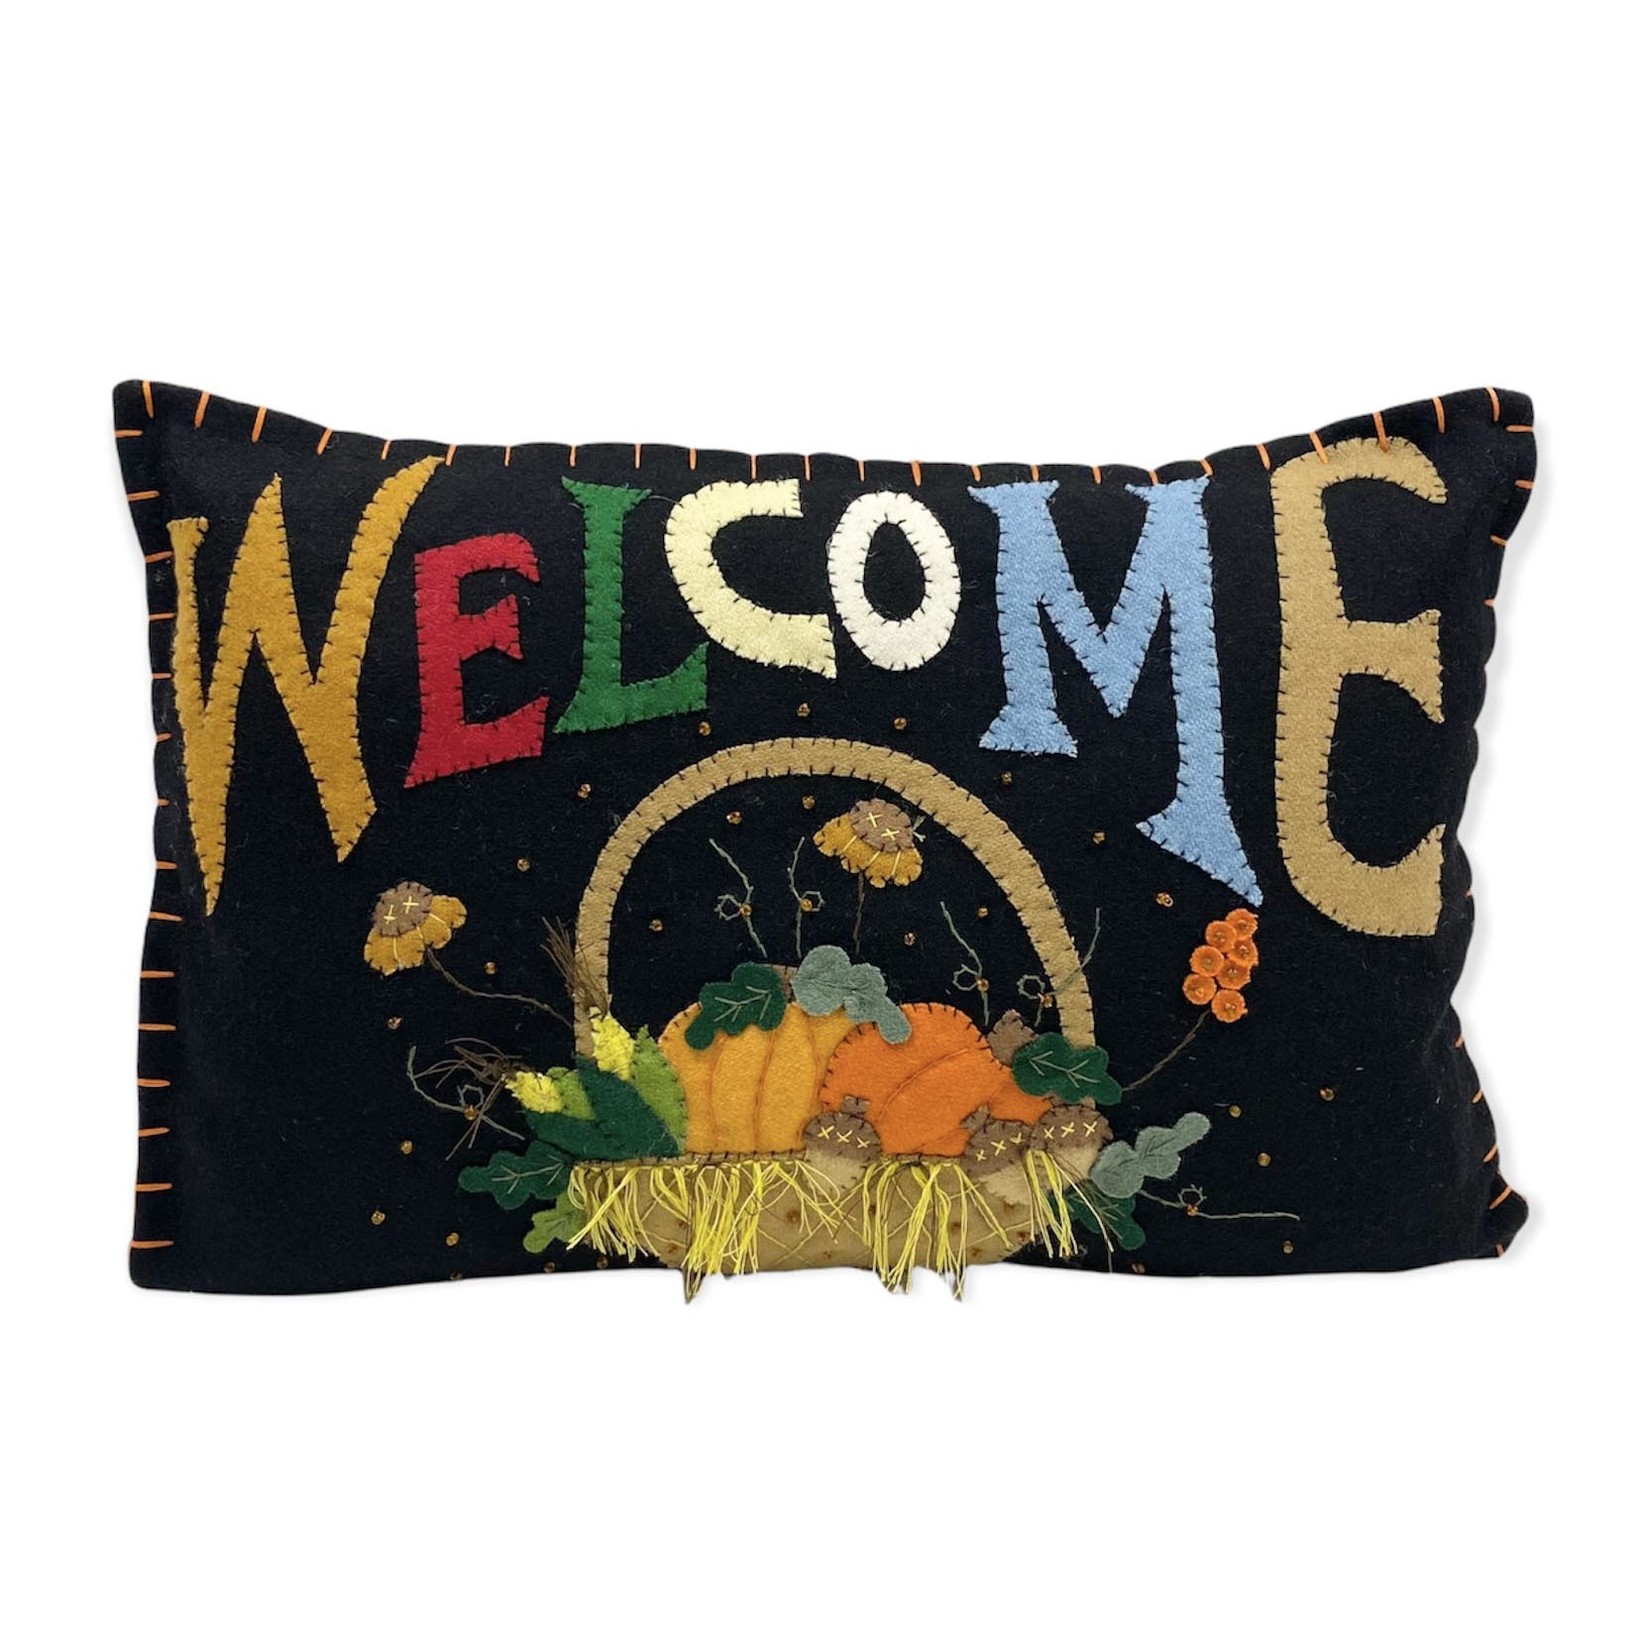 NEW WORLD ARTS Welcome Multicolored Pillow